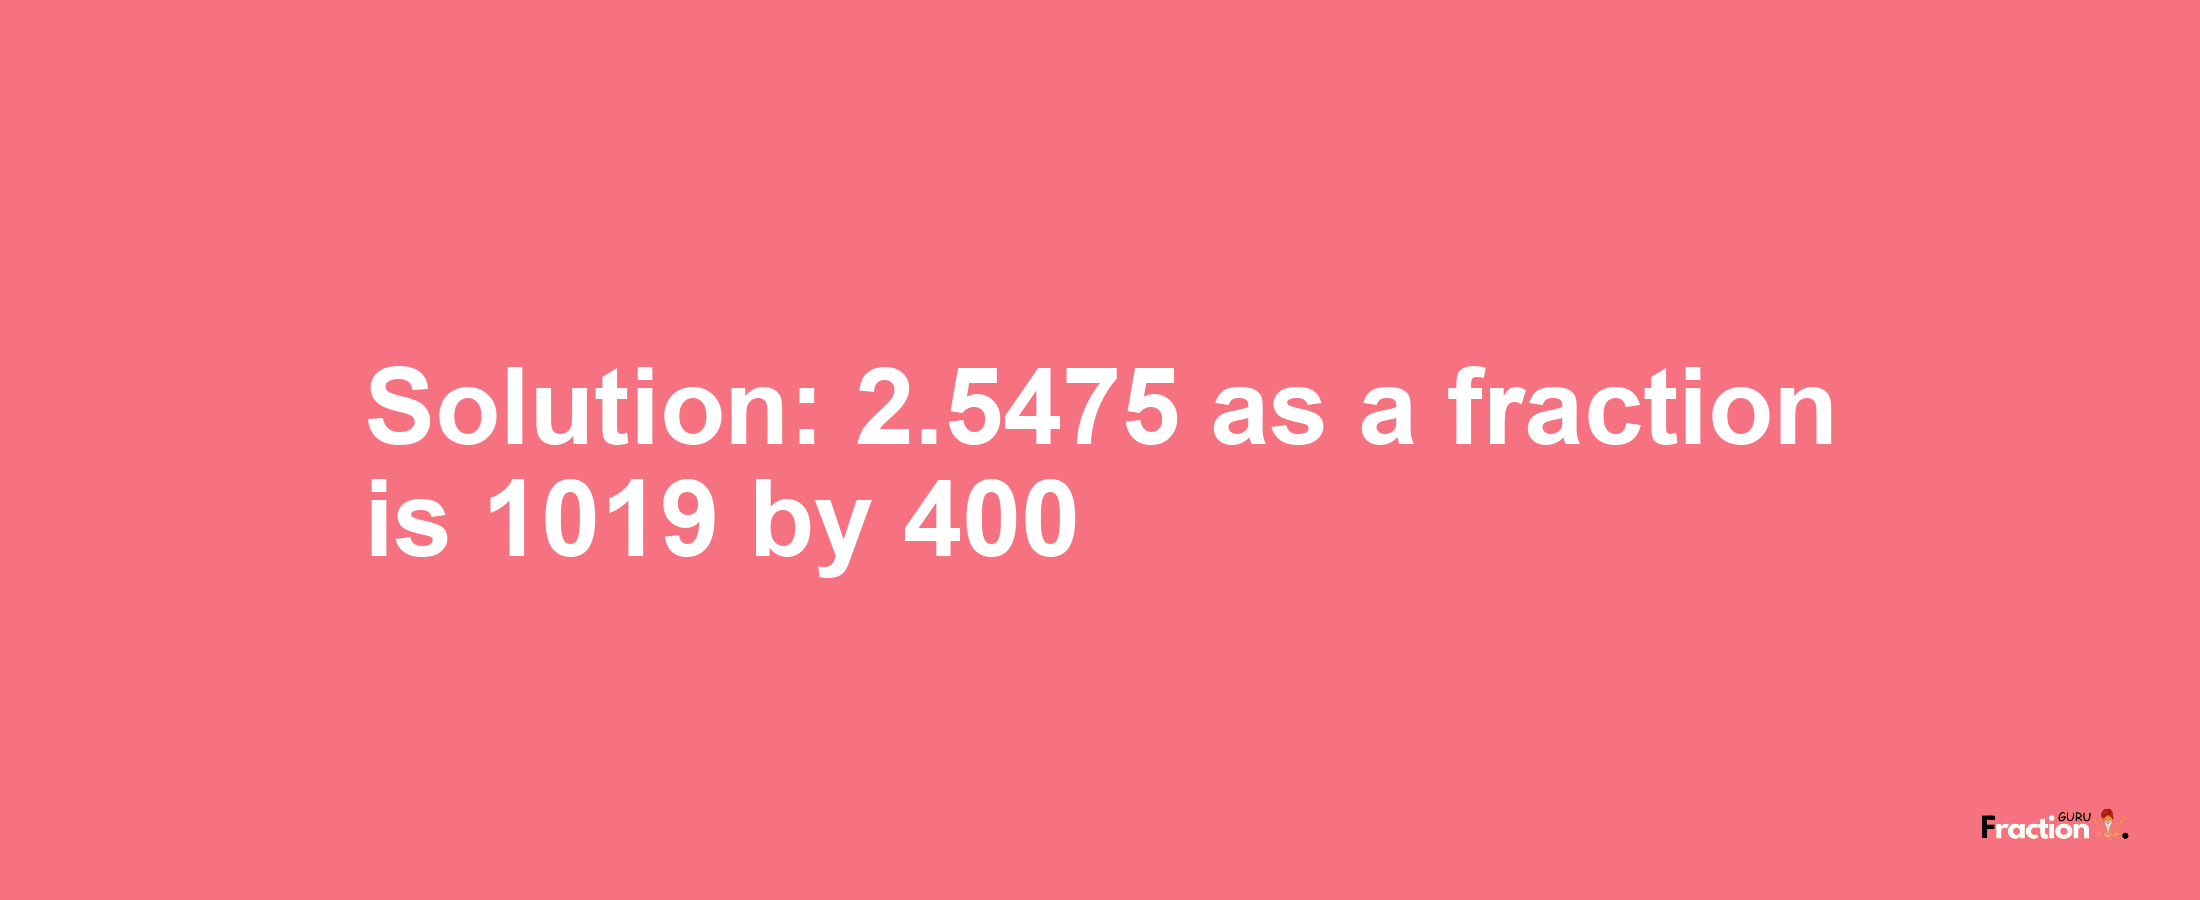 Solution:2.5475 as a fraction is 1019/400